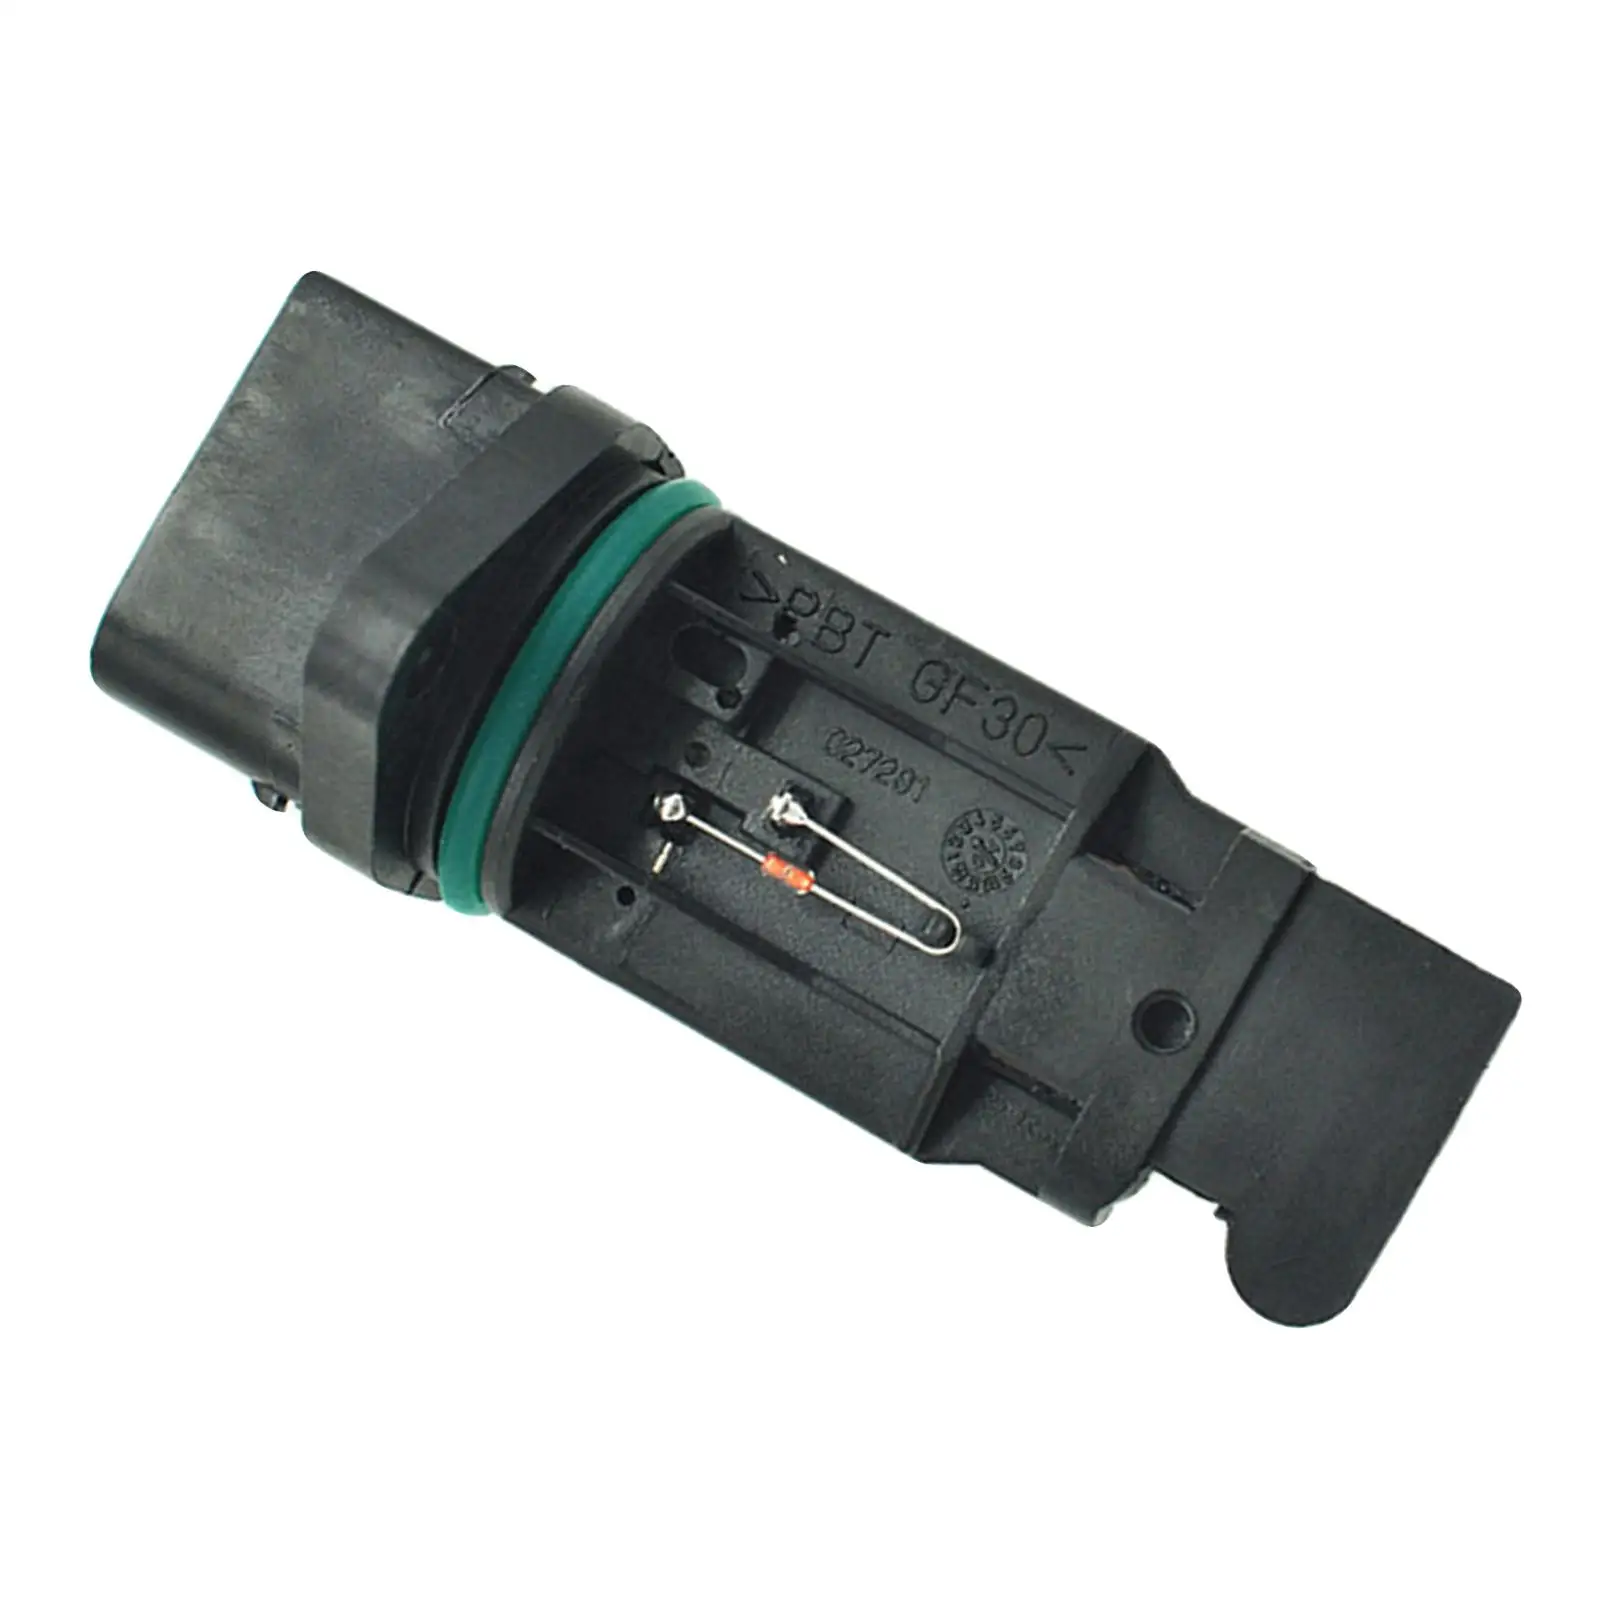  Maf Sensor Meter Replaces Assembly Fit for 911 3.99 ,0280217007 ,High Reliability,0 280 217